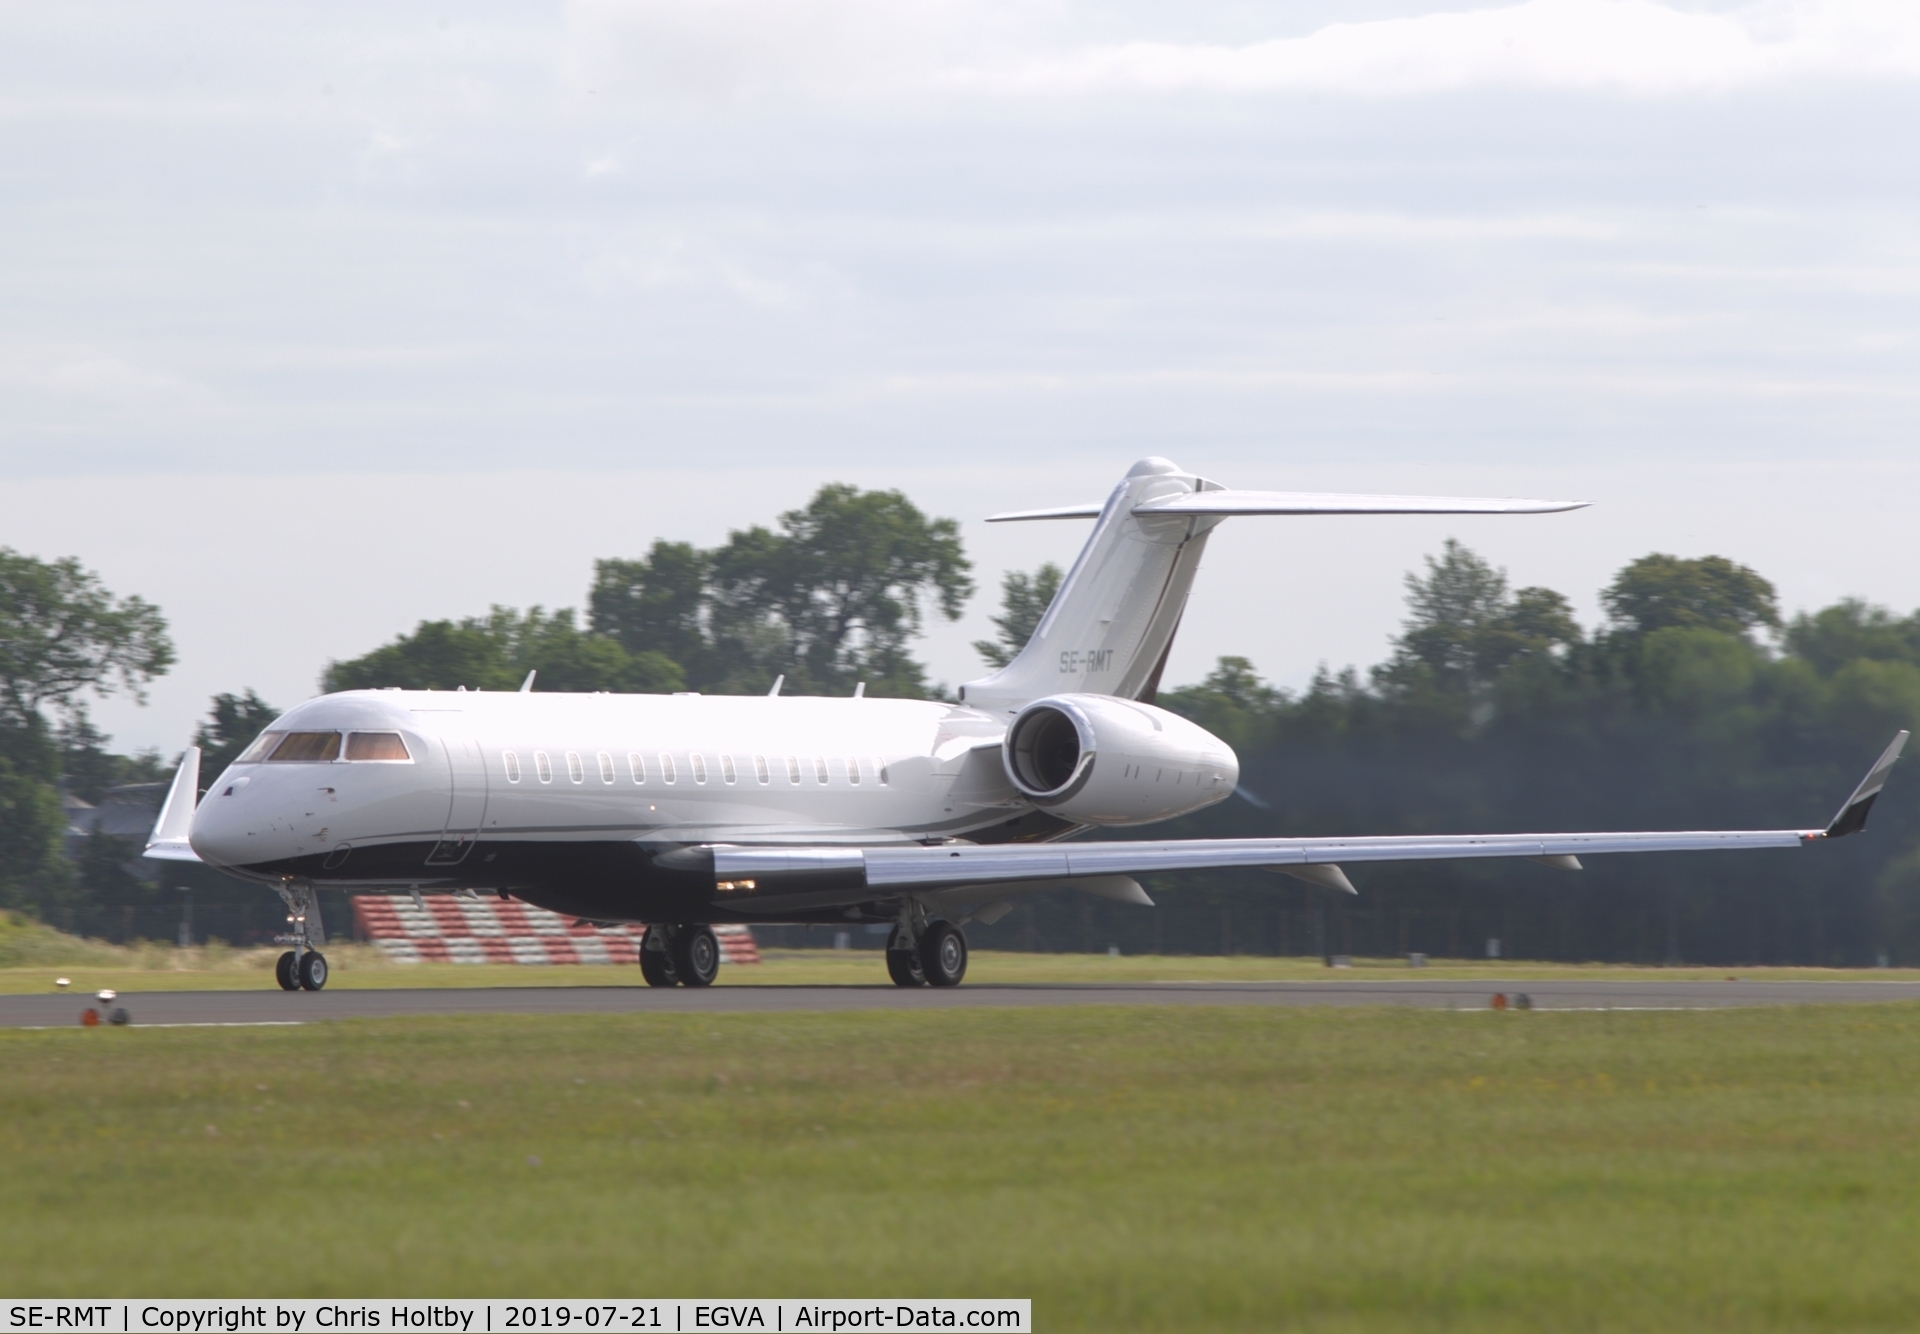 SE-RMT, 2014 Bombardier BD-700-1A10 Global 6000 C/N 9624, Taking off prior to RIAT 2019 display at Fairford